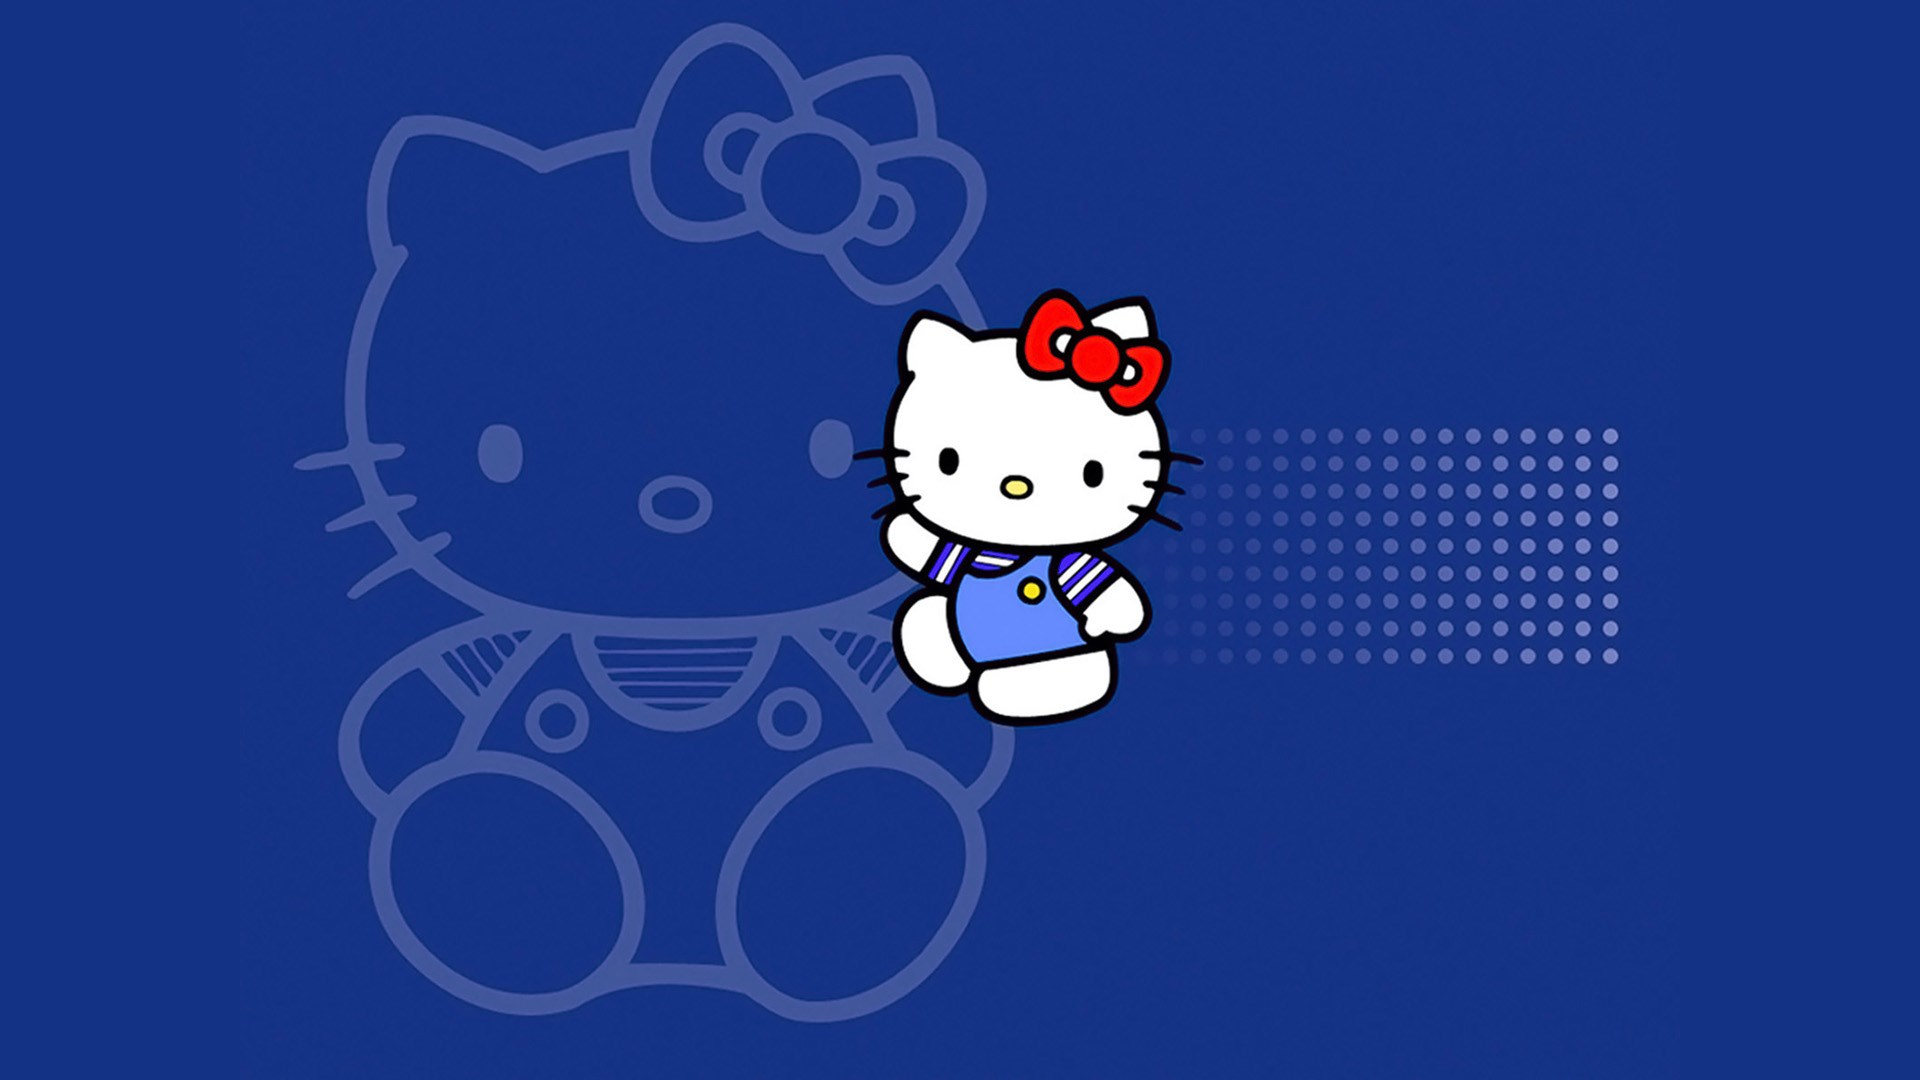 Hello Kitty Wallpaper 1920x1080 - Hello Kitty is a character created by the Japanese company Sanrio. She is a female cat who lives in a world of . - Hello Kitty